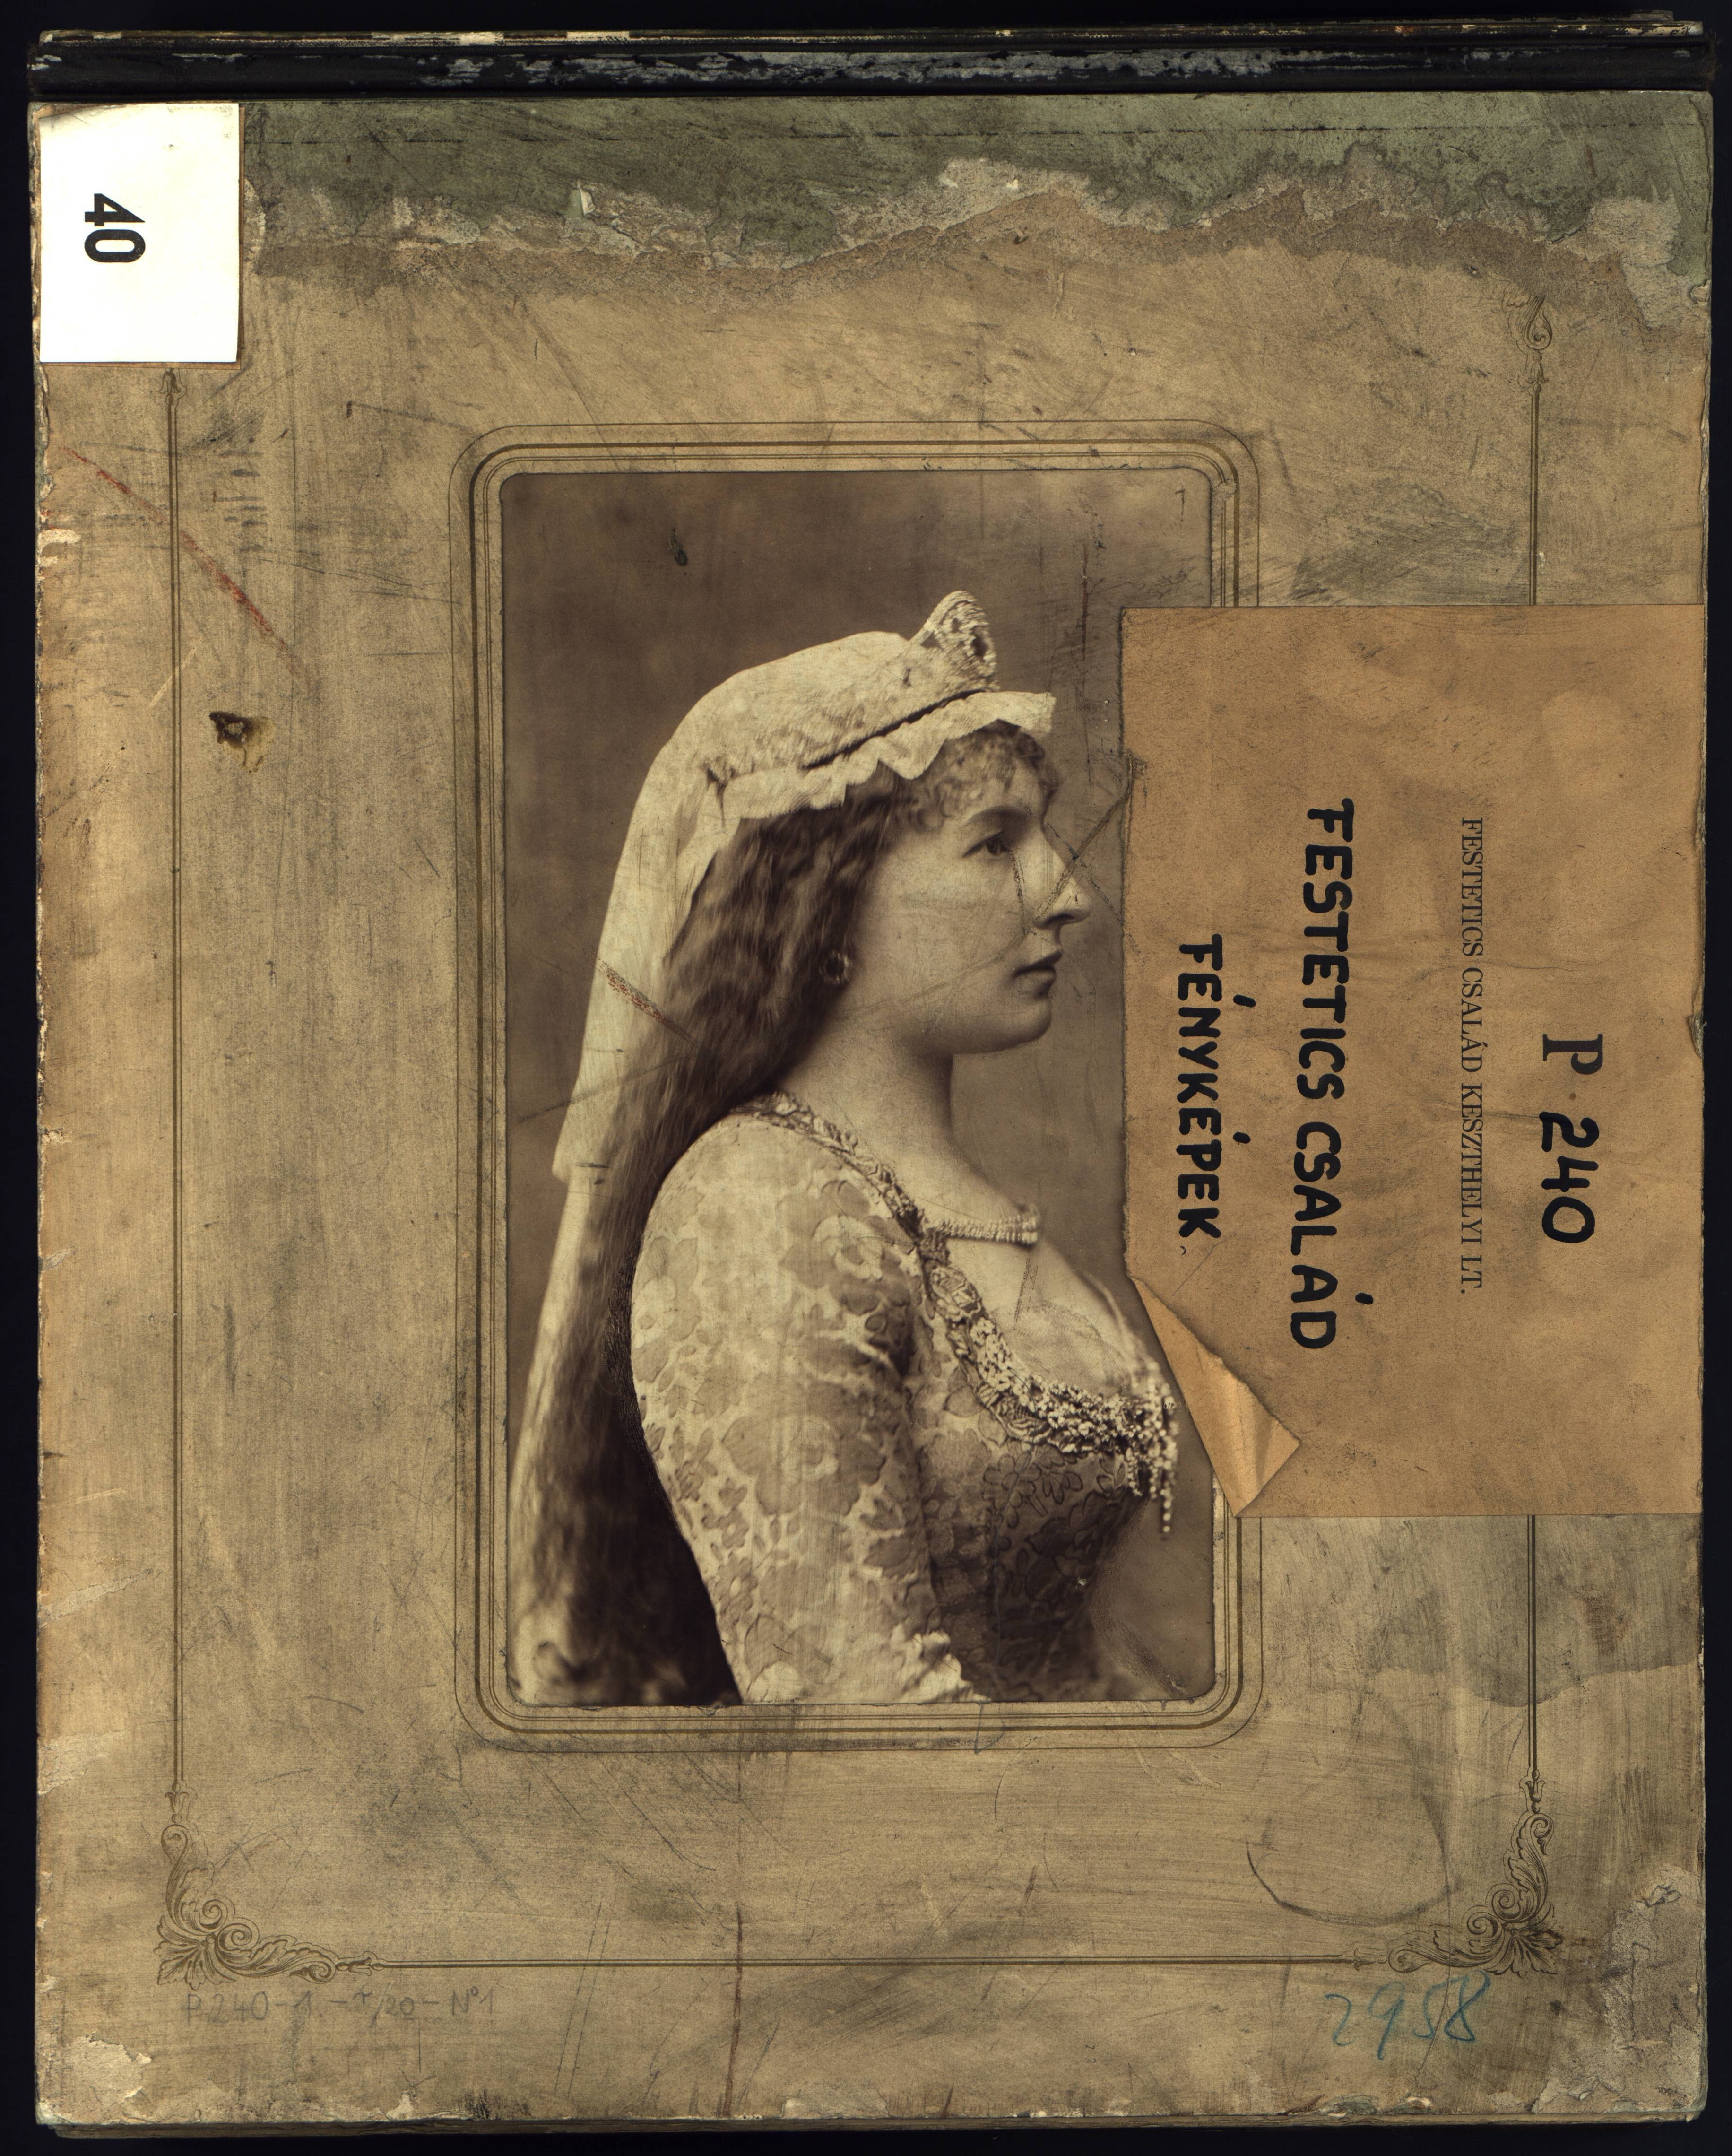  National Archives of Hungary, Festetics family archives, Princess Lujza Maria of Belgium, as Elsa in Lohengrin, 1885